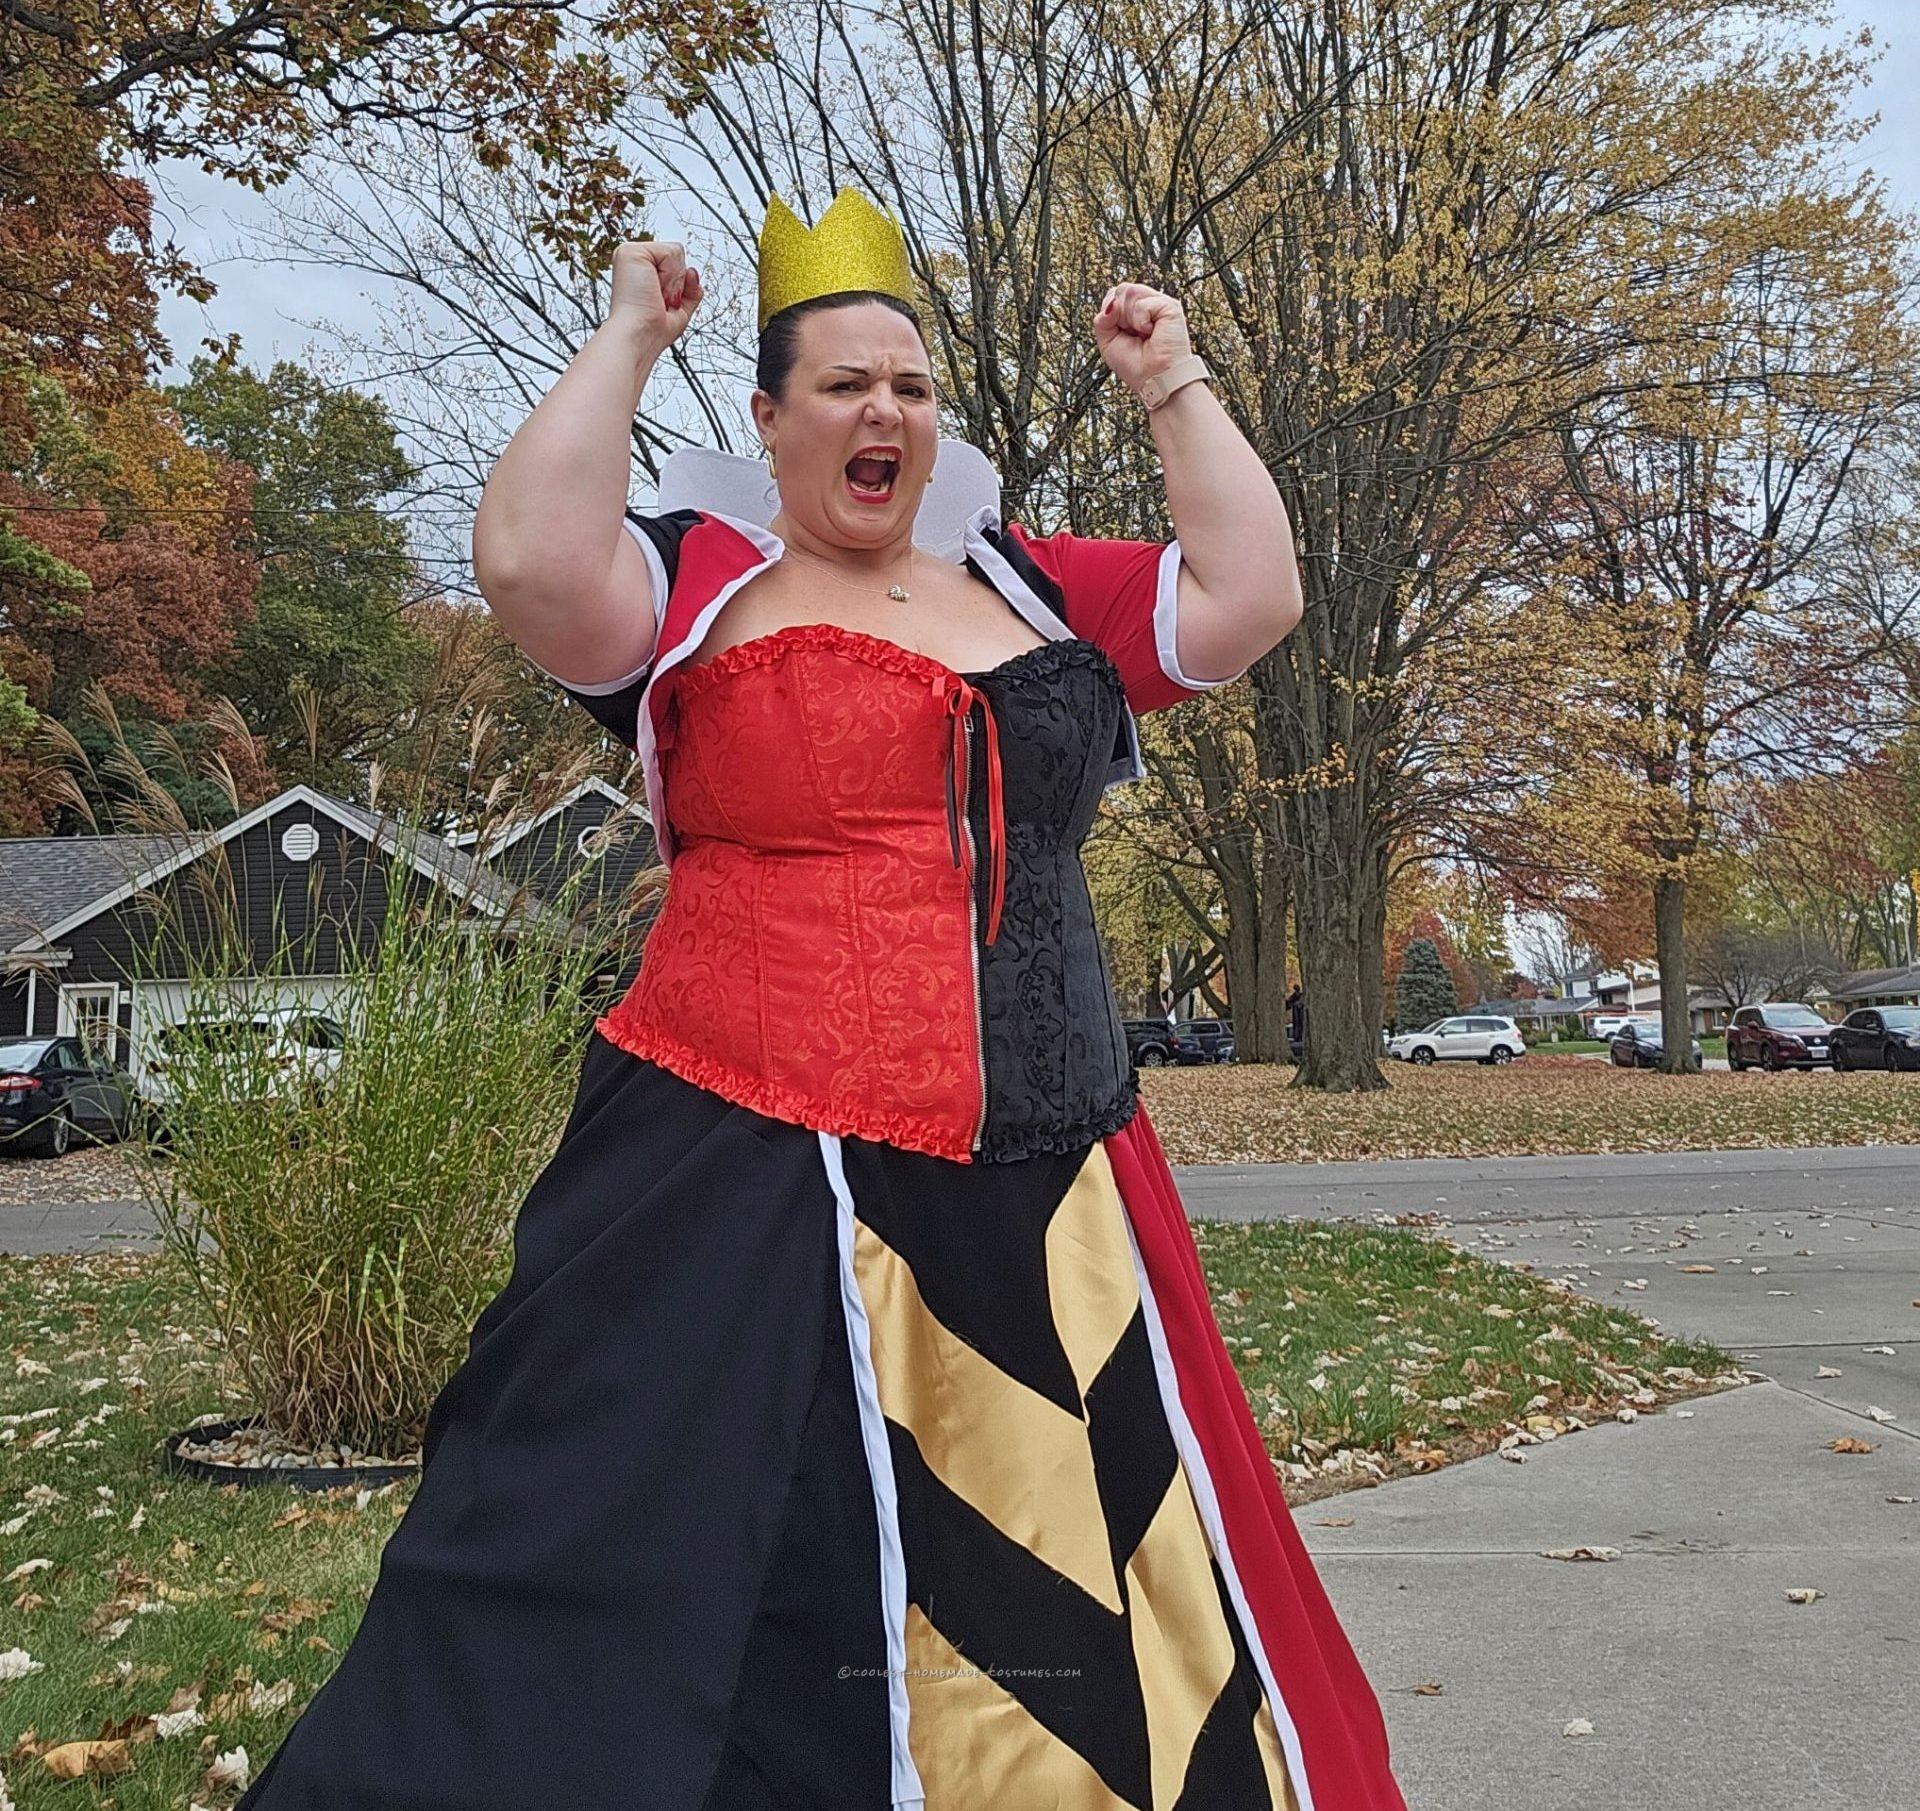 Off With Their Heads!- Queen of Hearts at her best